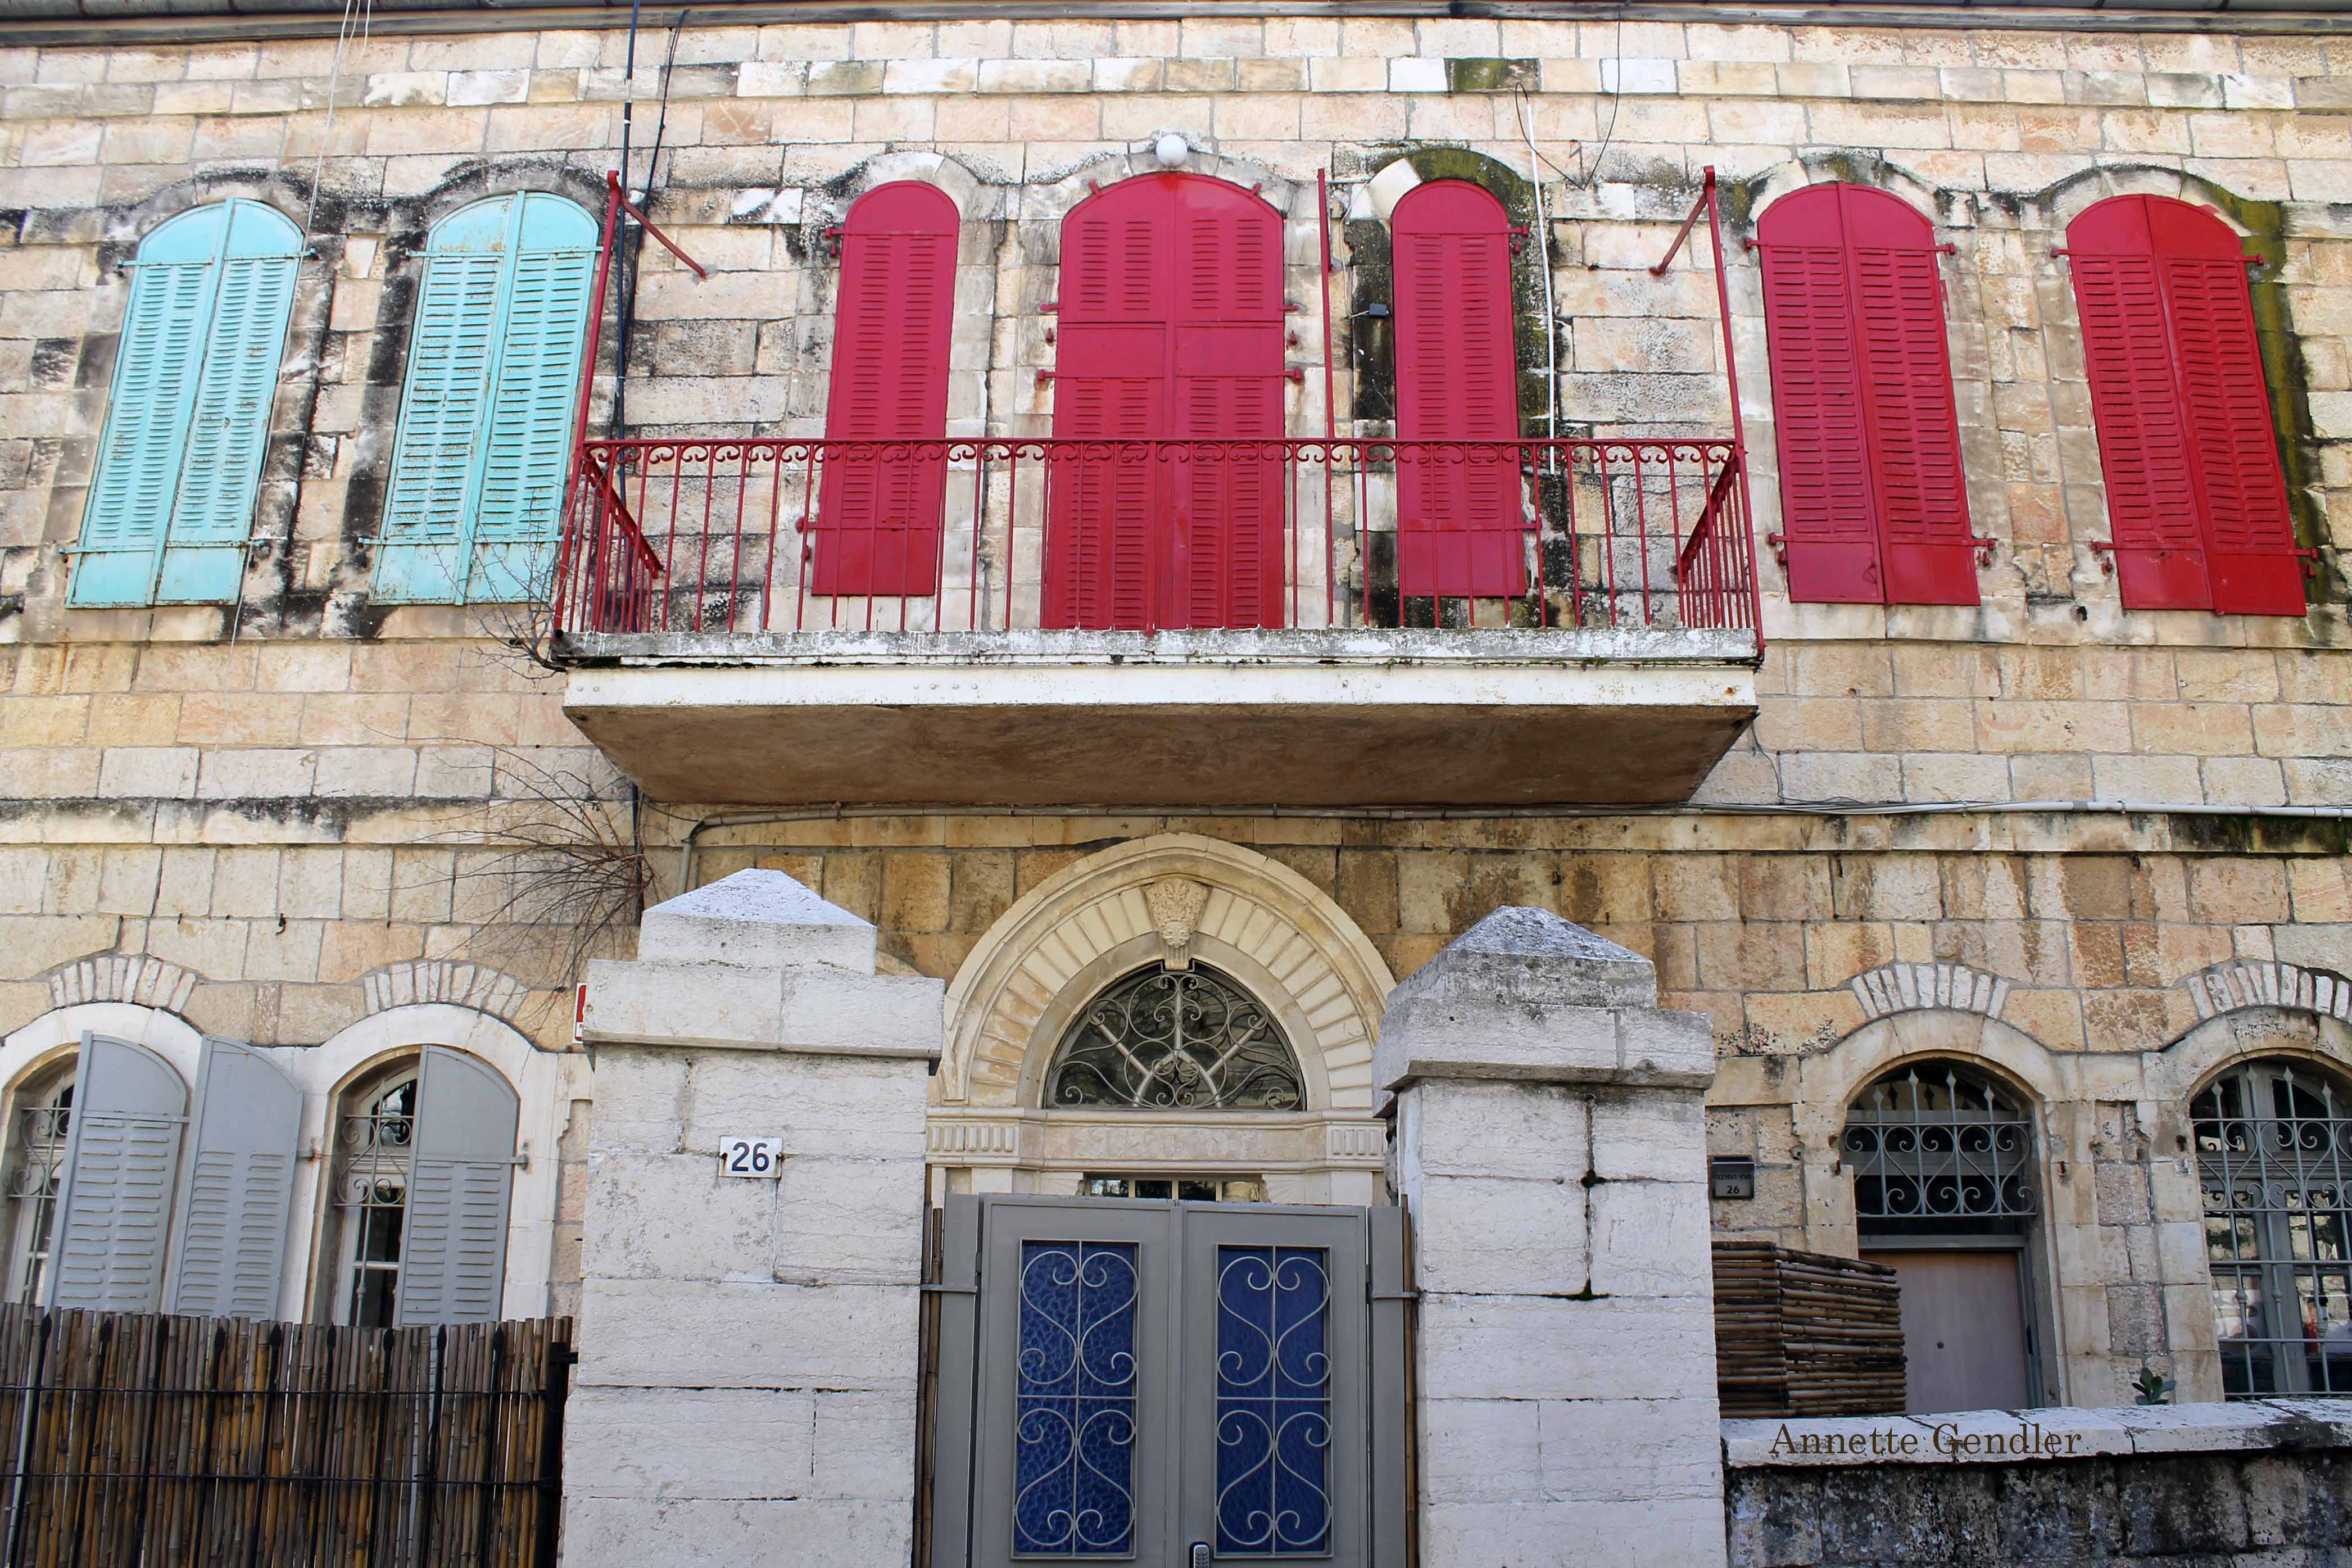 Frontal view of old two-story house in Musrara with red, blue and grey shutters on arched windows